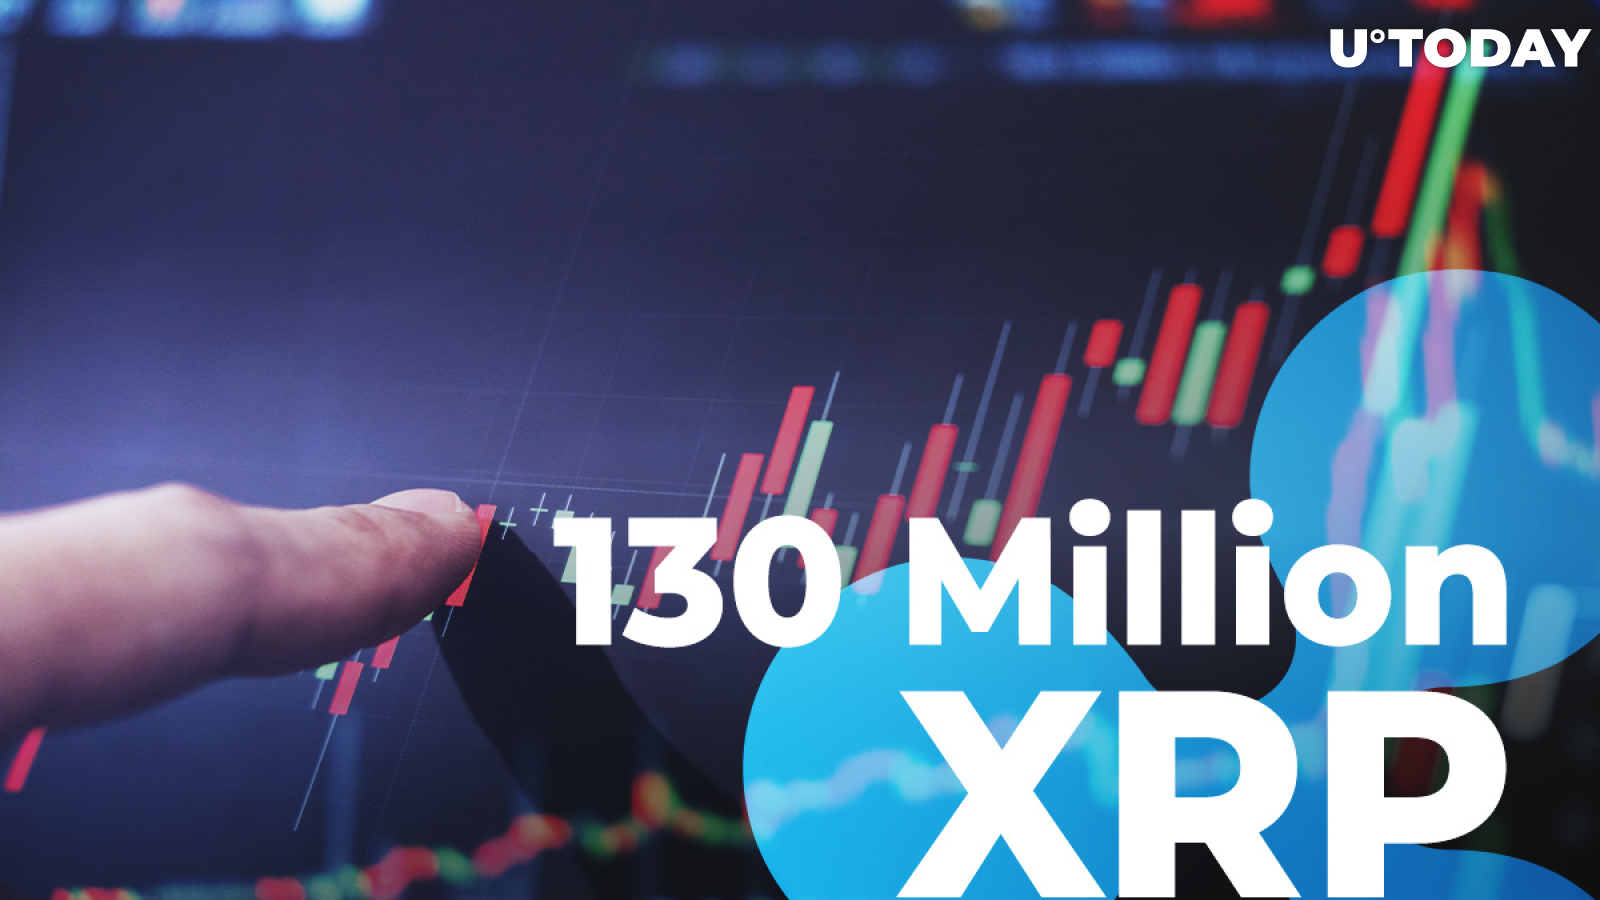 Ripple Giant and Its ODL Partner Exchange 130 Million XRP